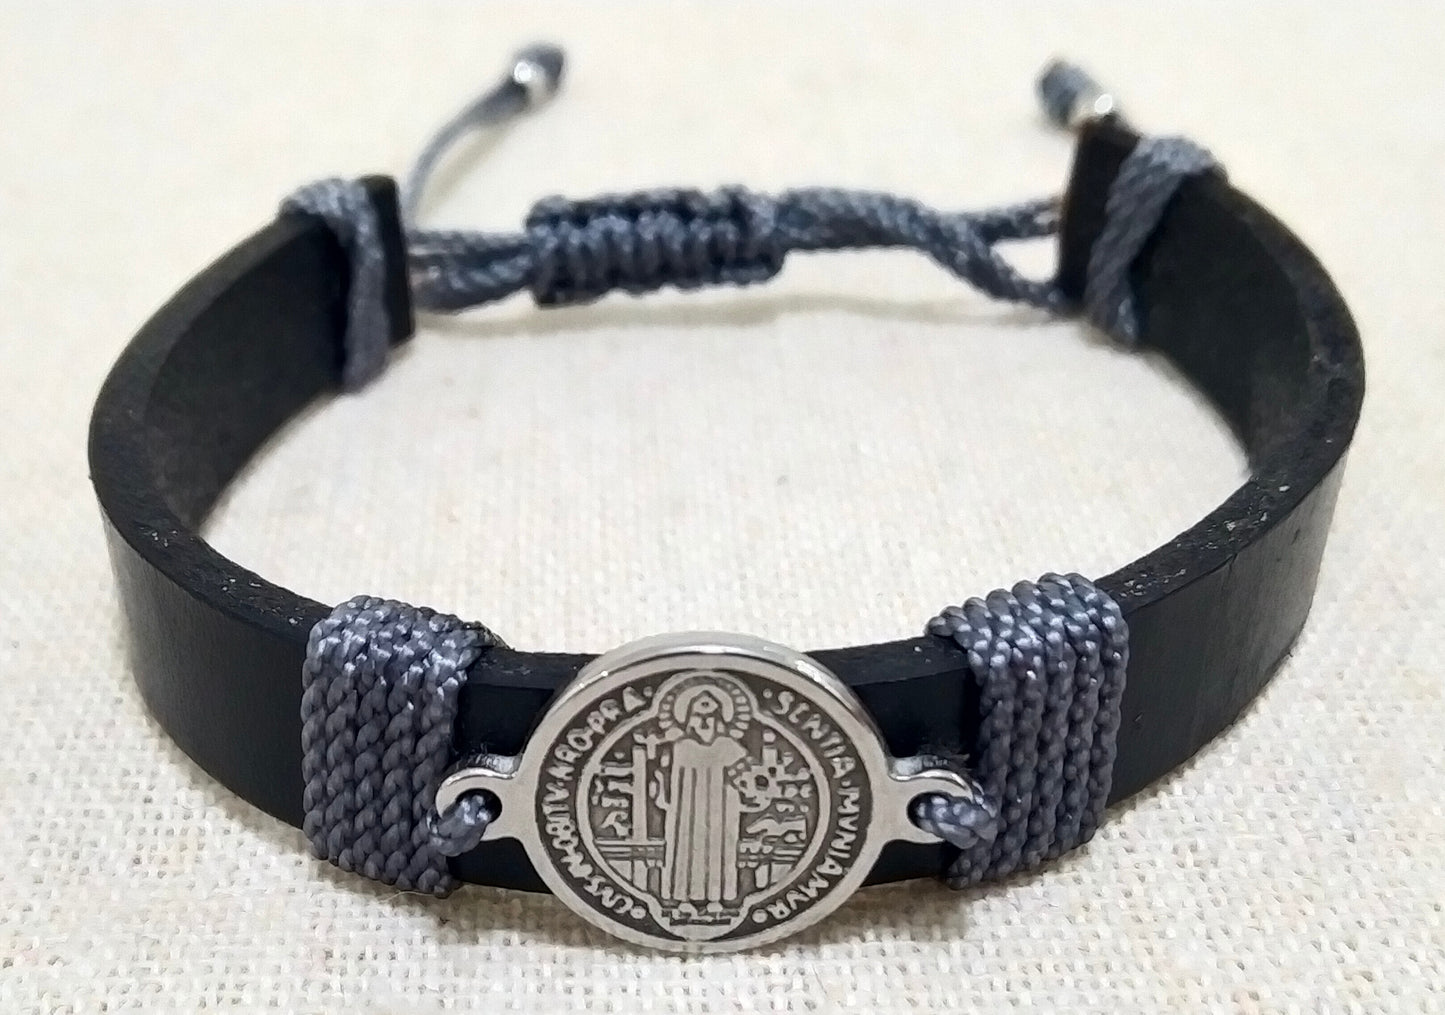 Adjustable leather and stainless steel bracelet with the seal of San Benito Abad